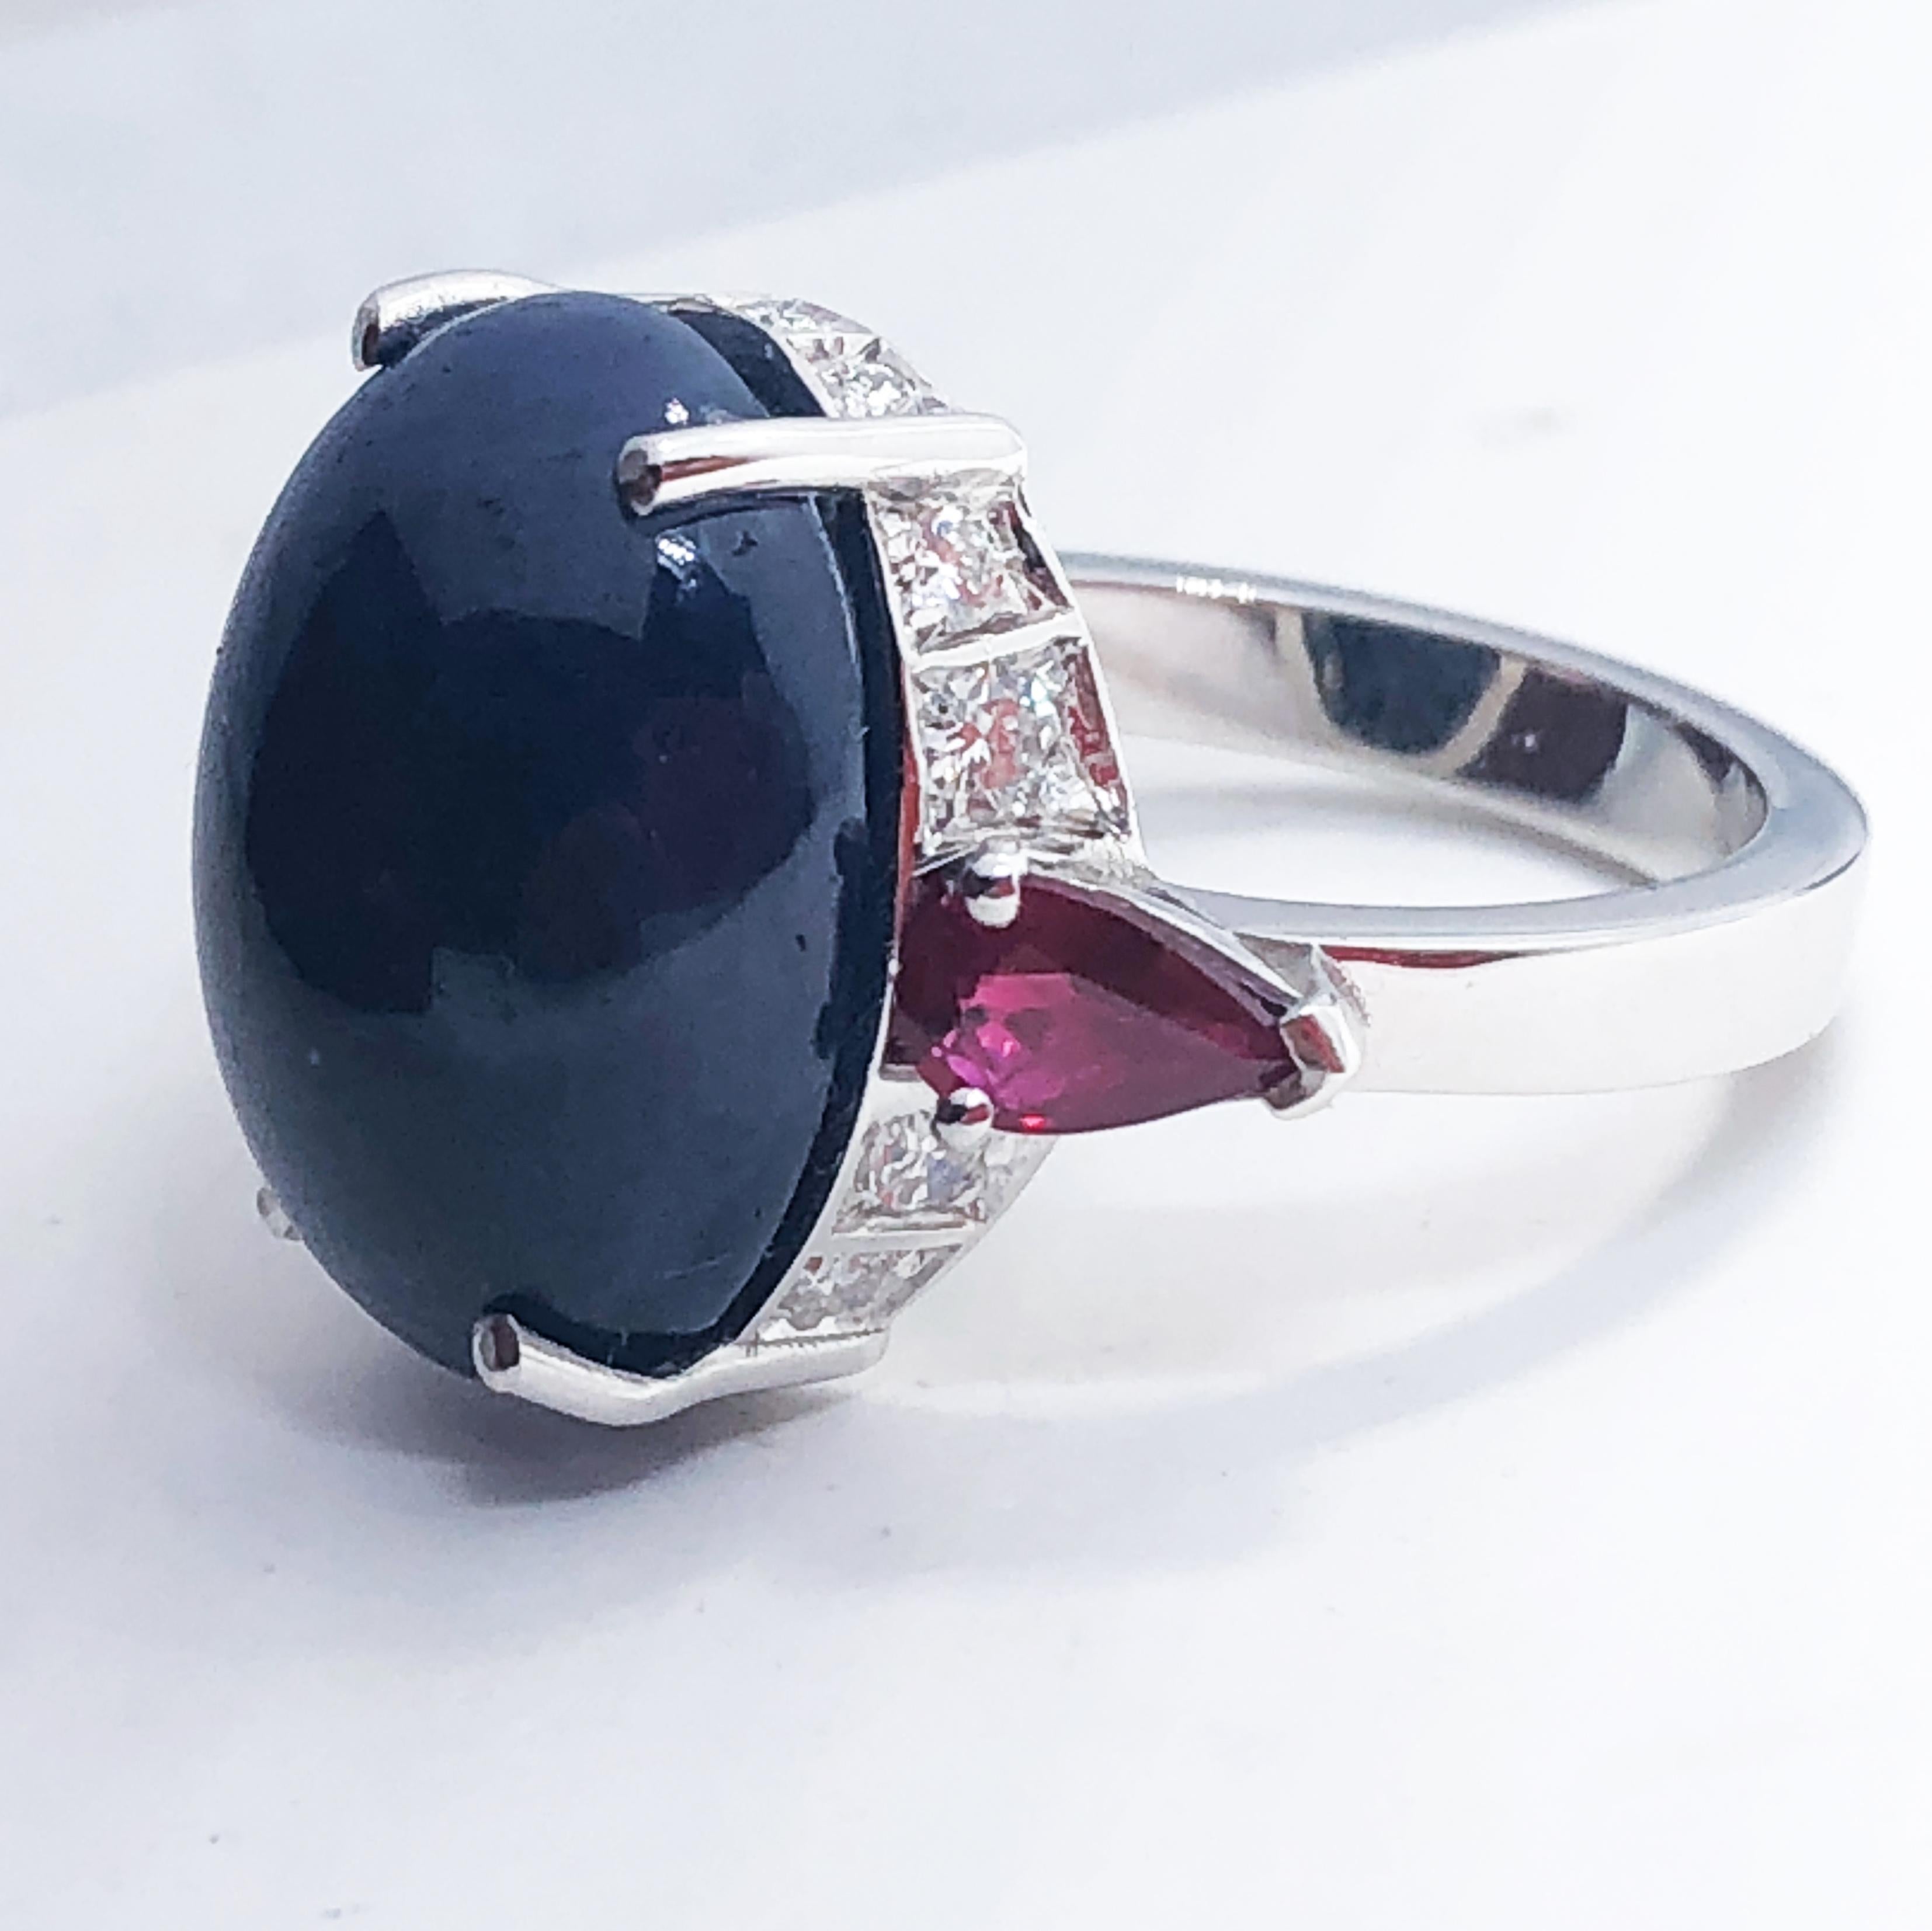 One-of-a-kind Cocktail Ring featuring a 16.60 Carat Natural Oval Sapphire Cabochon, two 0.40 Carat Ruby drops in a chic white diamond 18K white gold setting.

US Size 6 1/4 French Size 53
We offer complimentary resizing on this piece